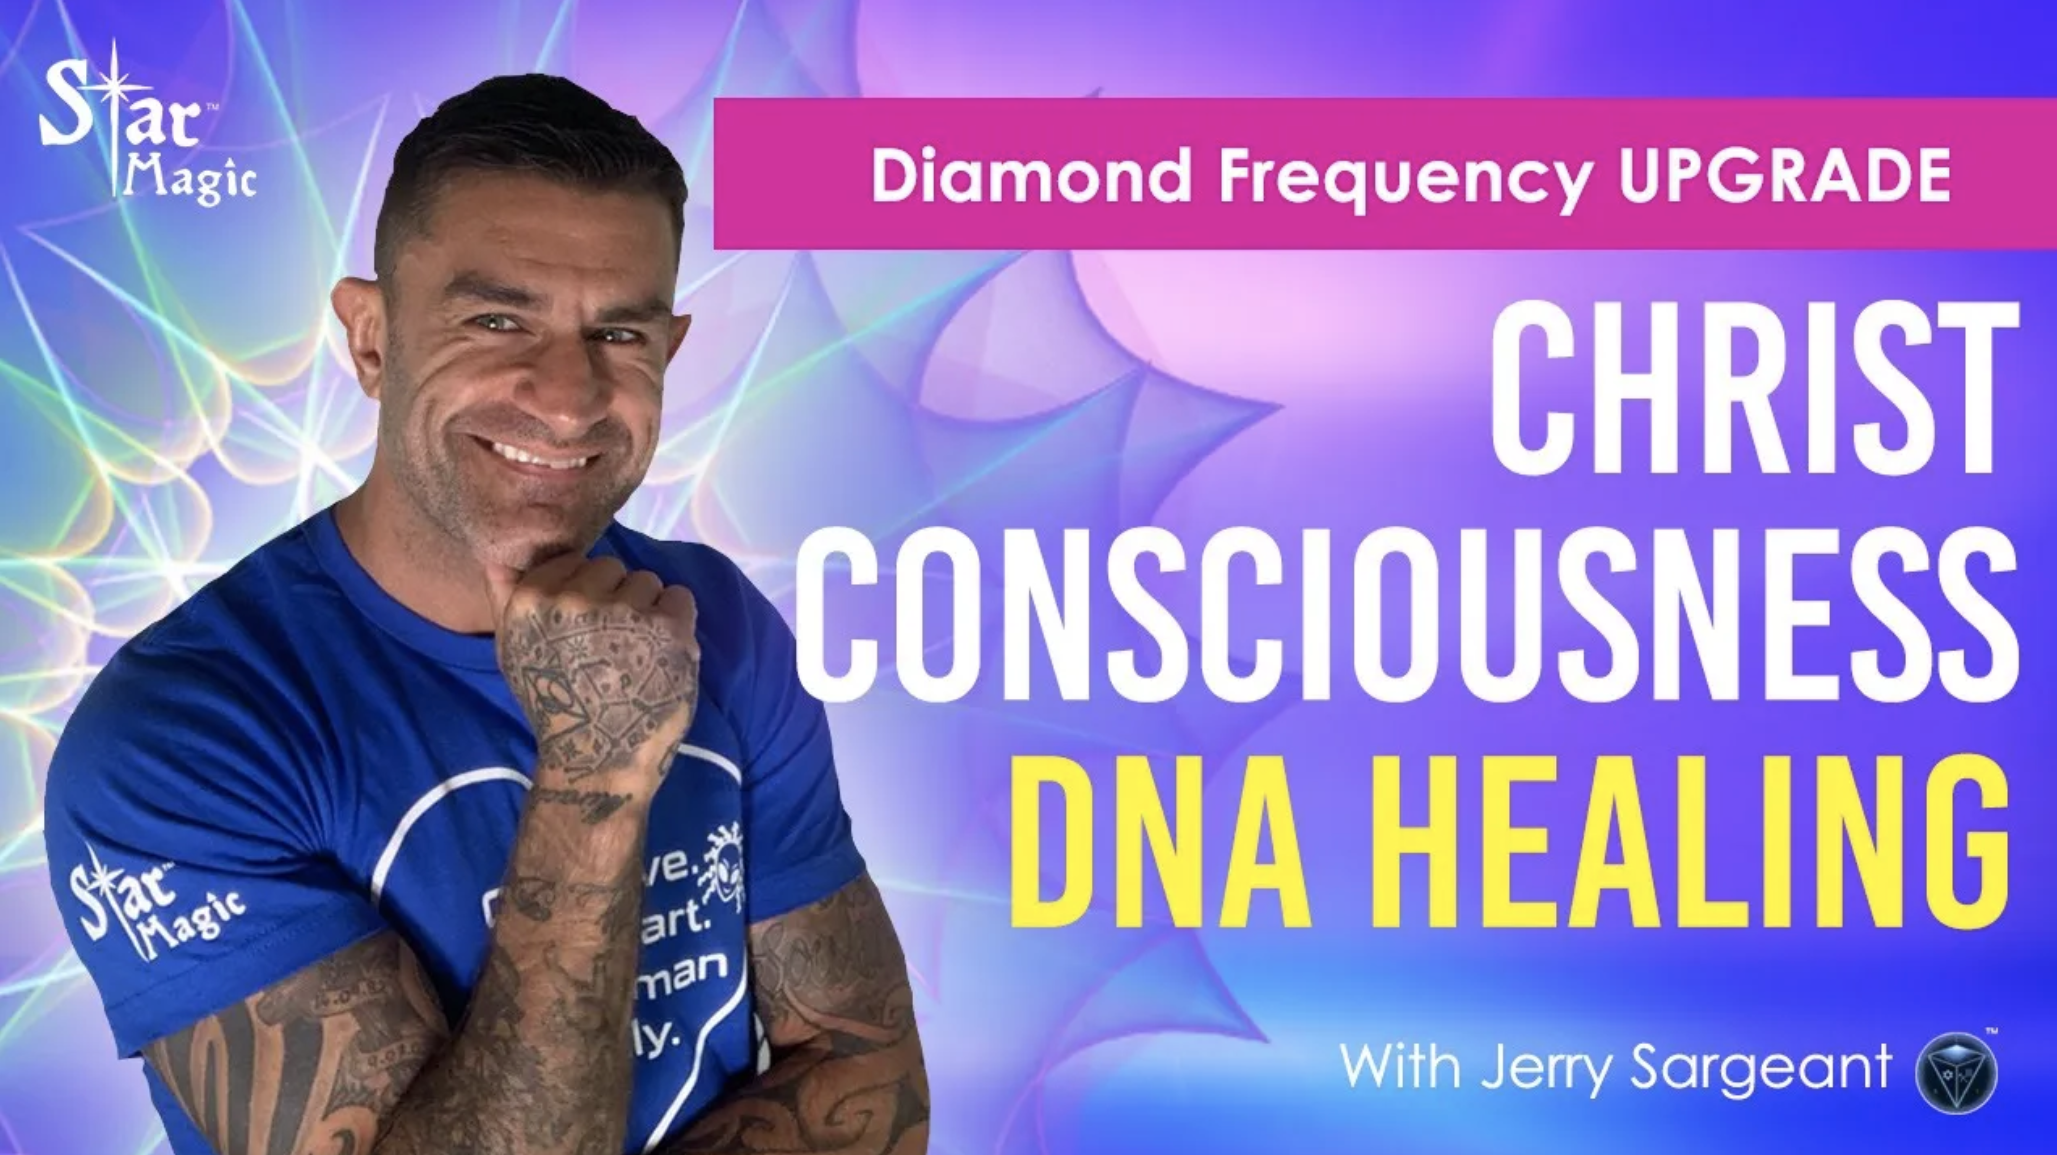 Christ Consciousness DNA Healing and Diamond Frequency UPGRADE